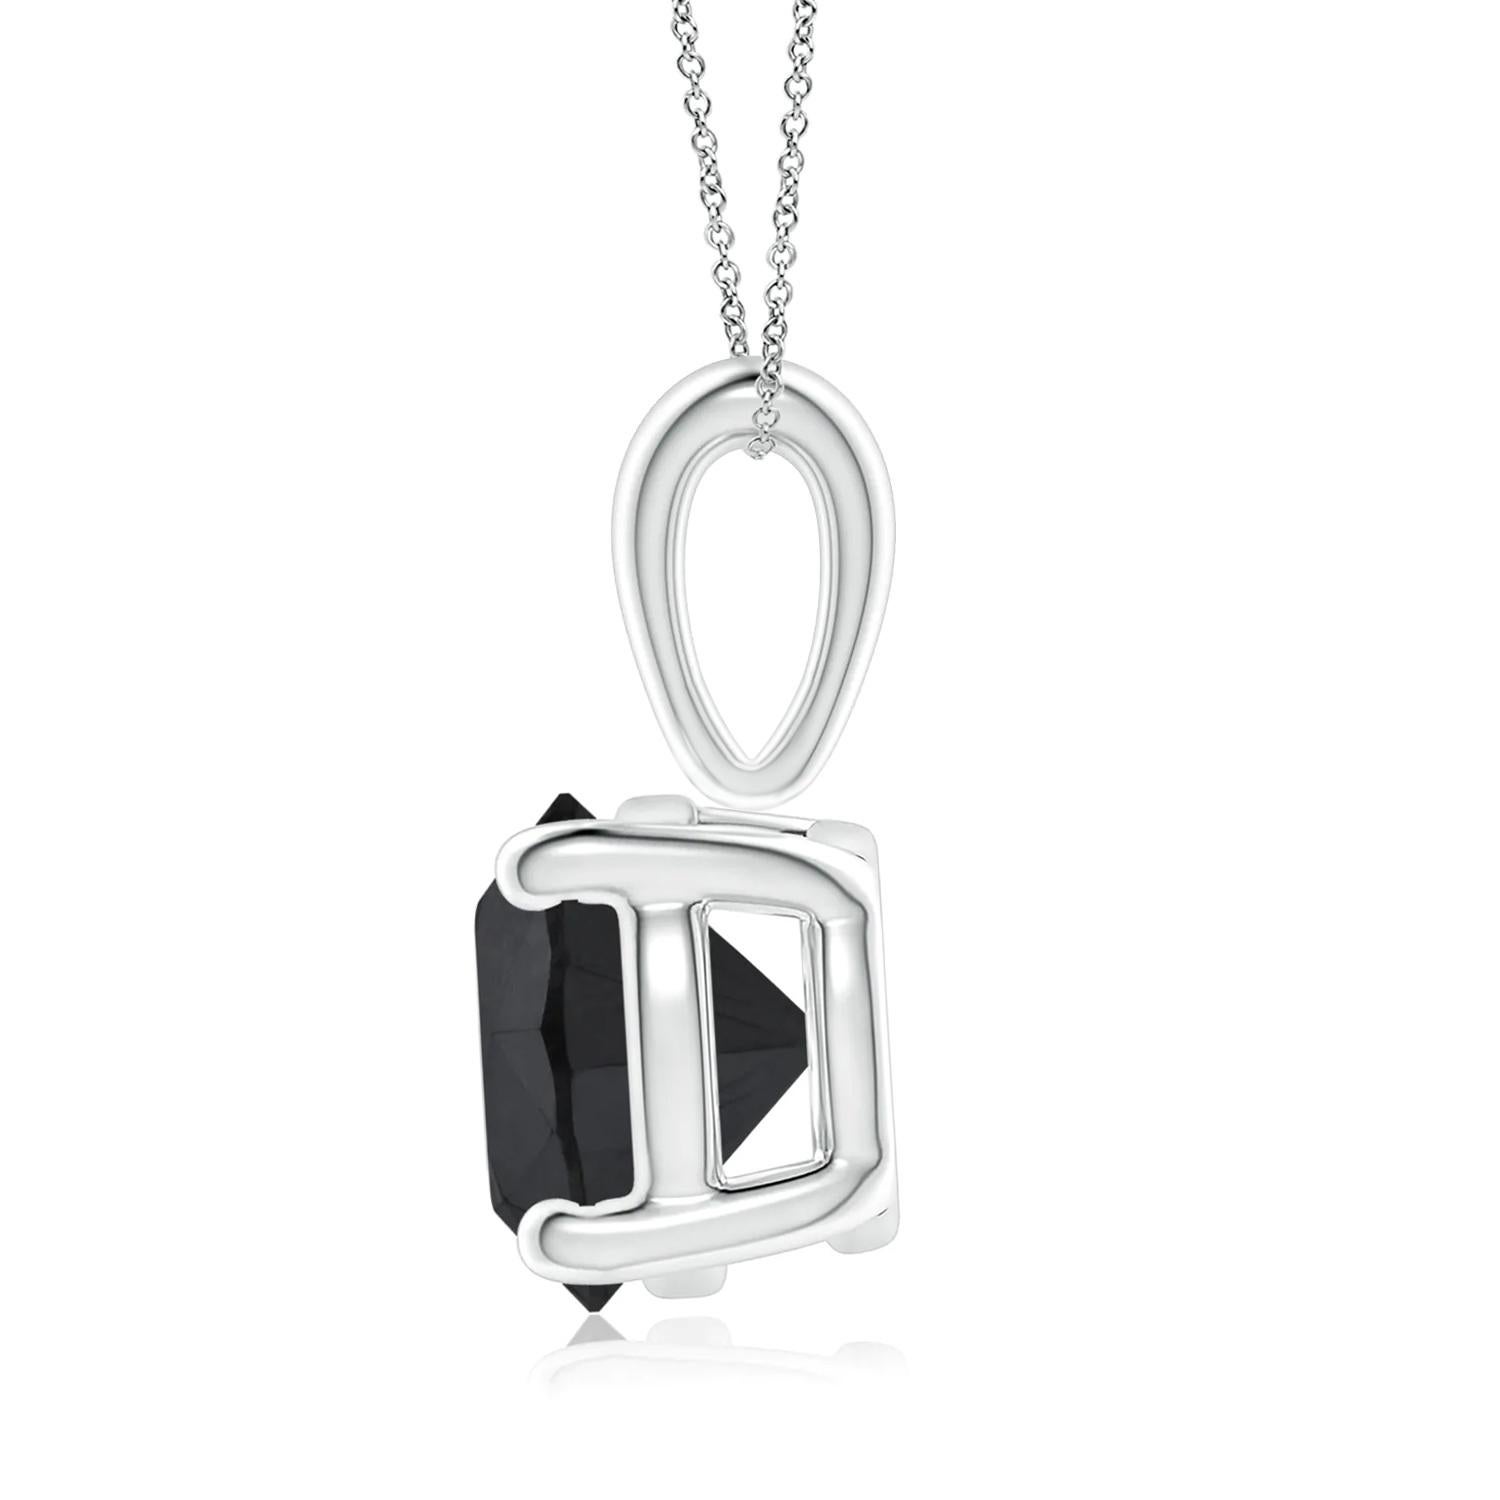 Surprise a special woman in your life with this breathtaking, statement hand crafted solitaire black diamond necklace. This eye-catching pendant necklace features a 1.55 carat round cut black diamond, measuring 6.73 x 6.79 x 4.52 mm set in 14k white